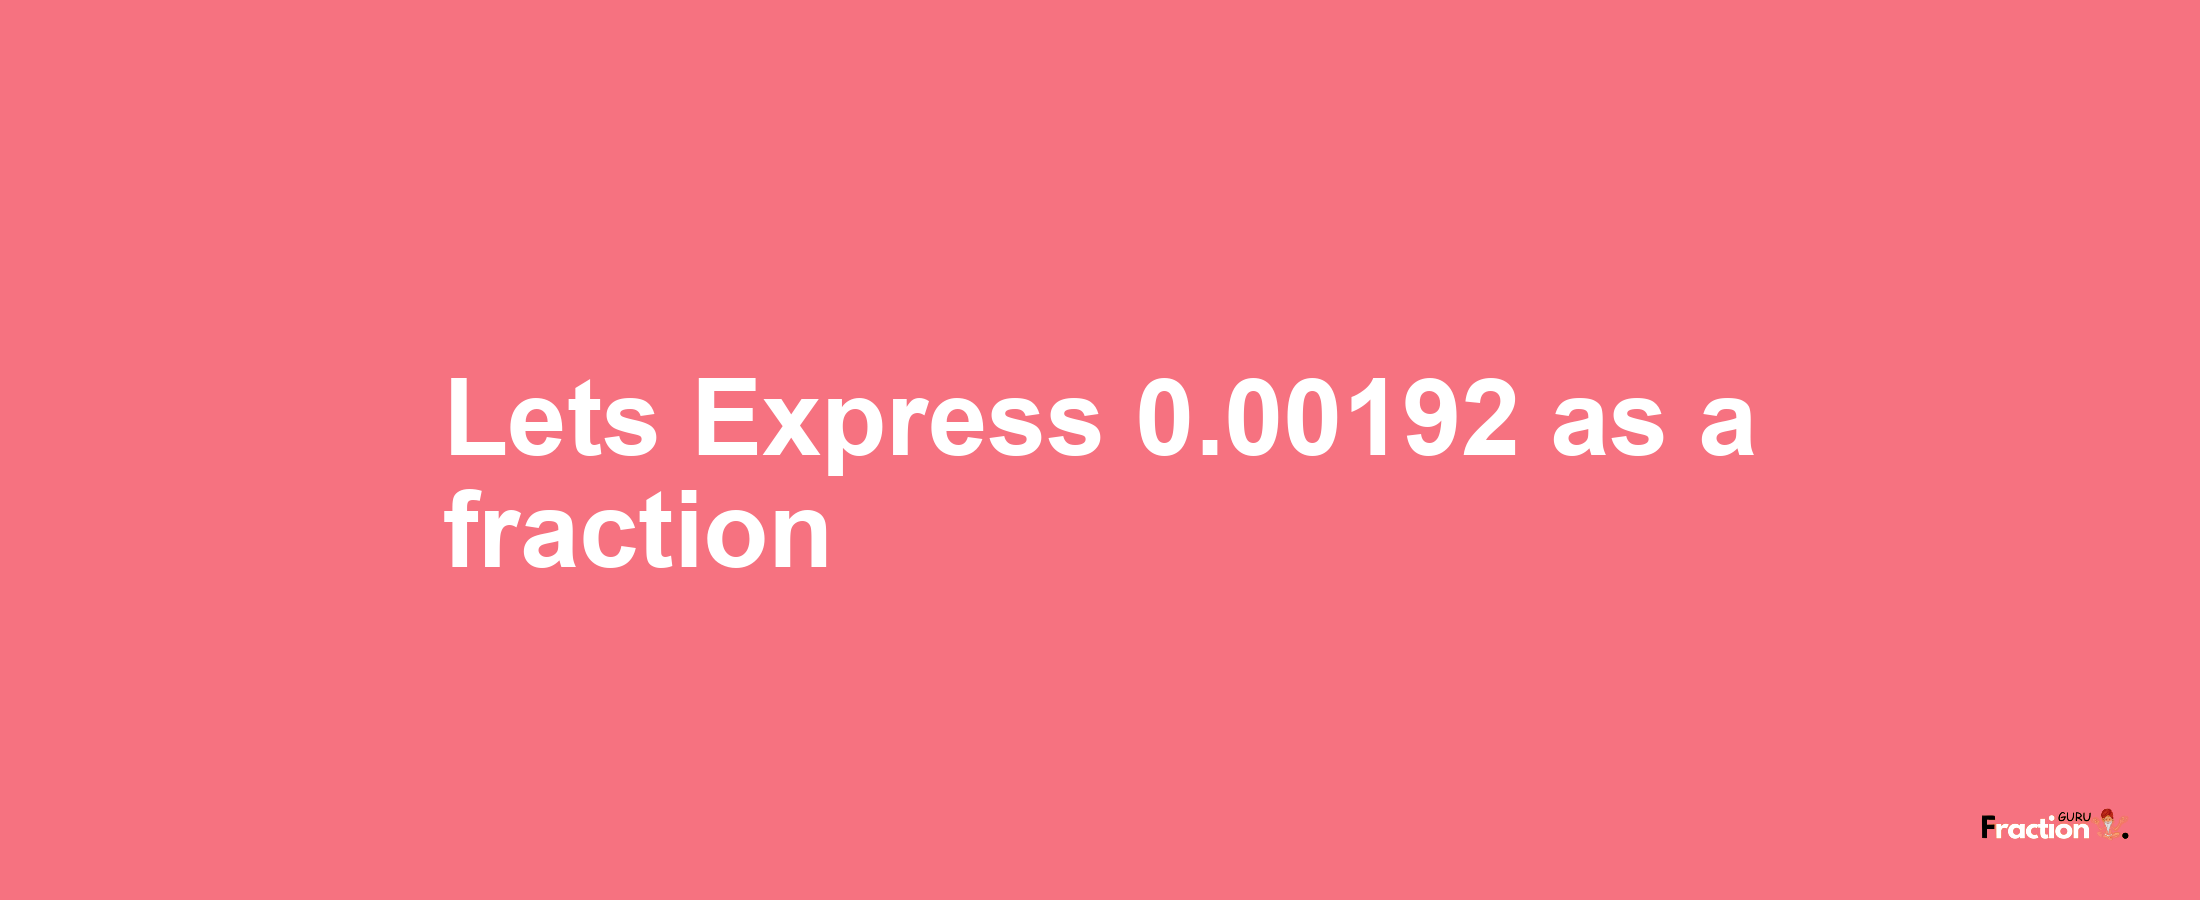 Lets Express 0.00192 as afraction